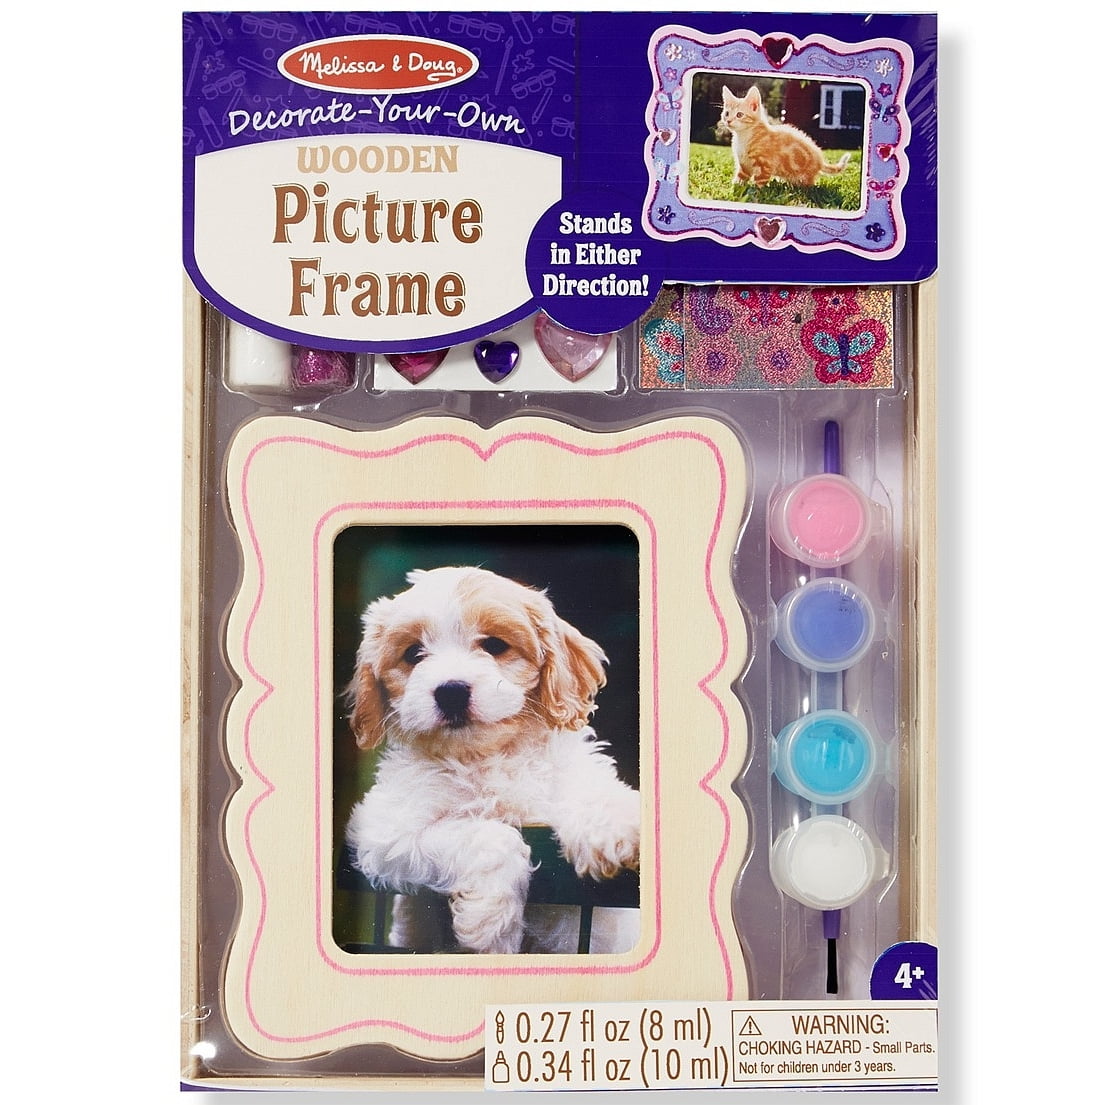 Melissa & Doug Picture Frame Pad (11 x 13 inches) - 48 Pages, 12 Desig –  Bazillion Dreams